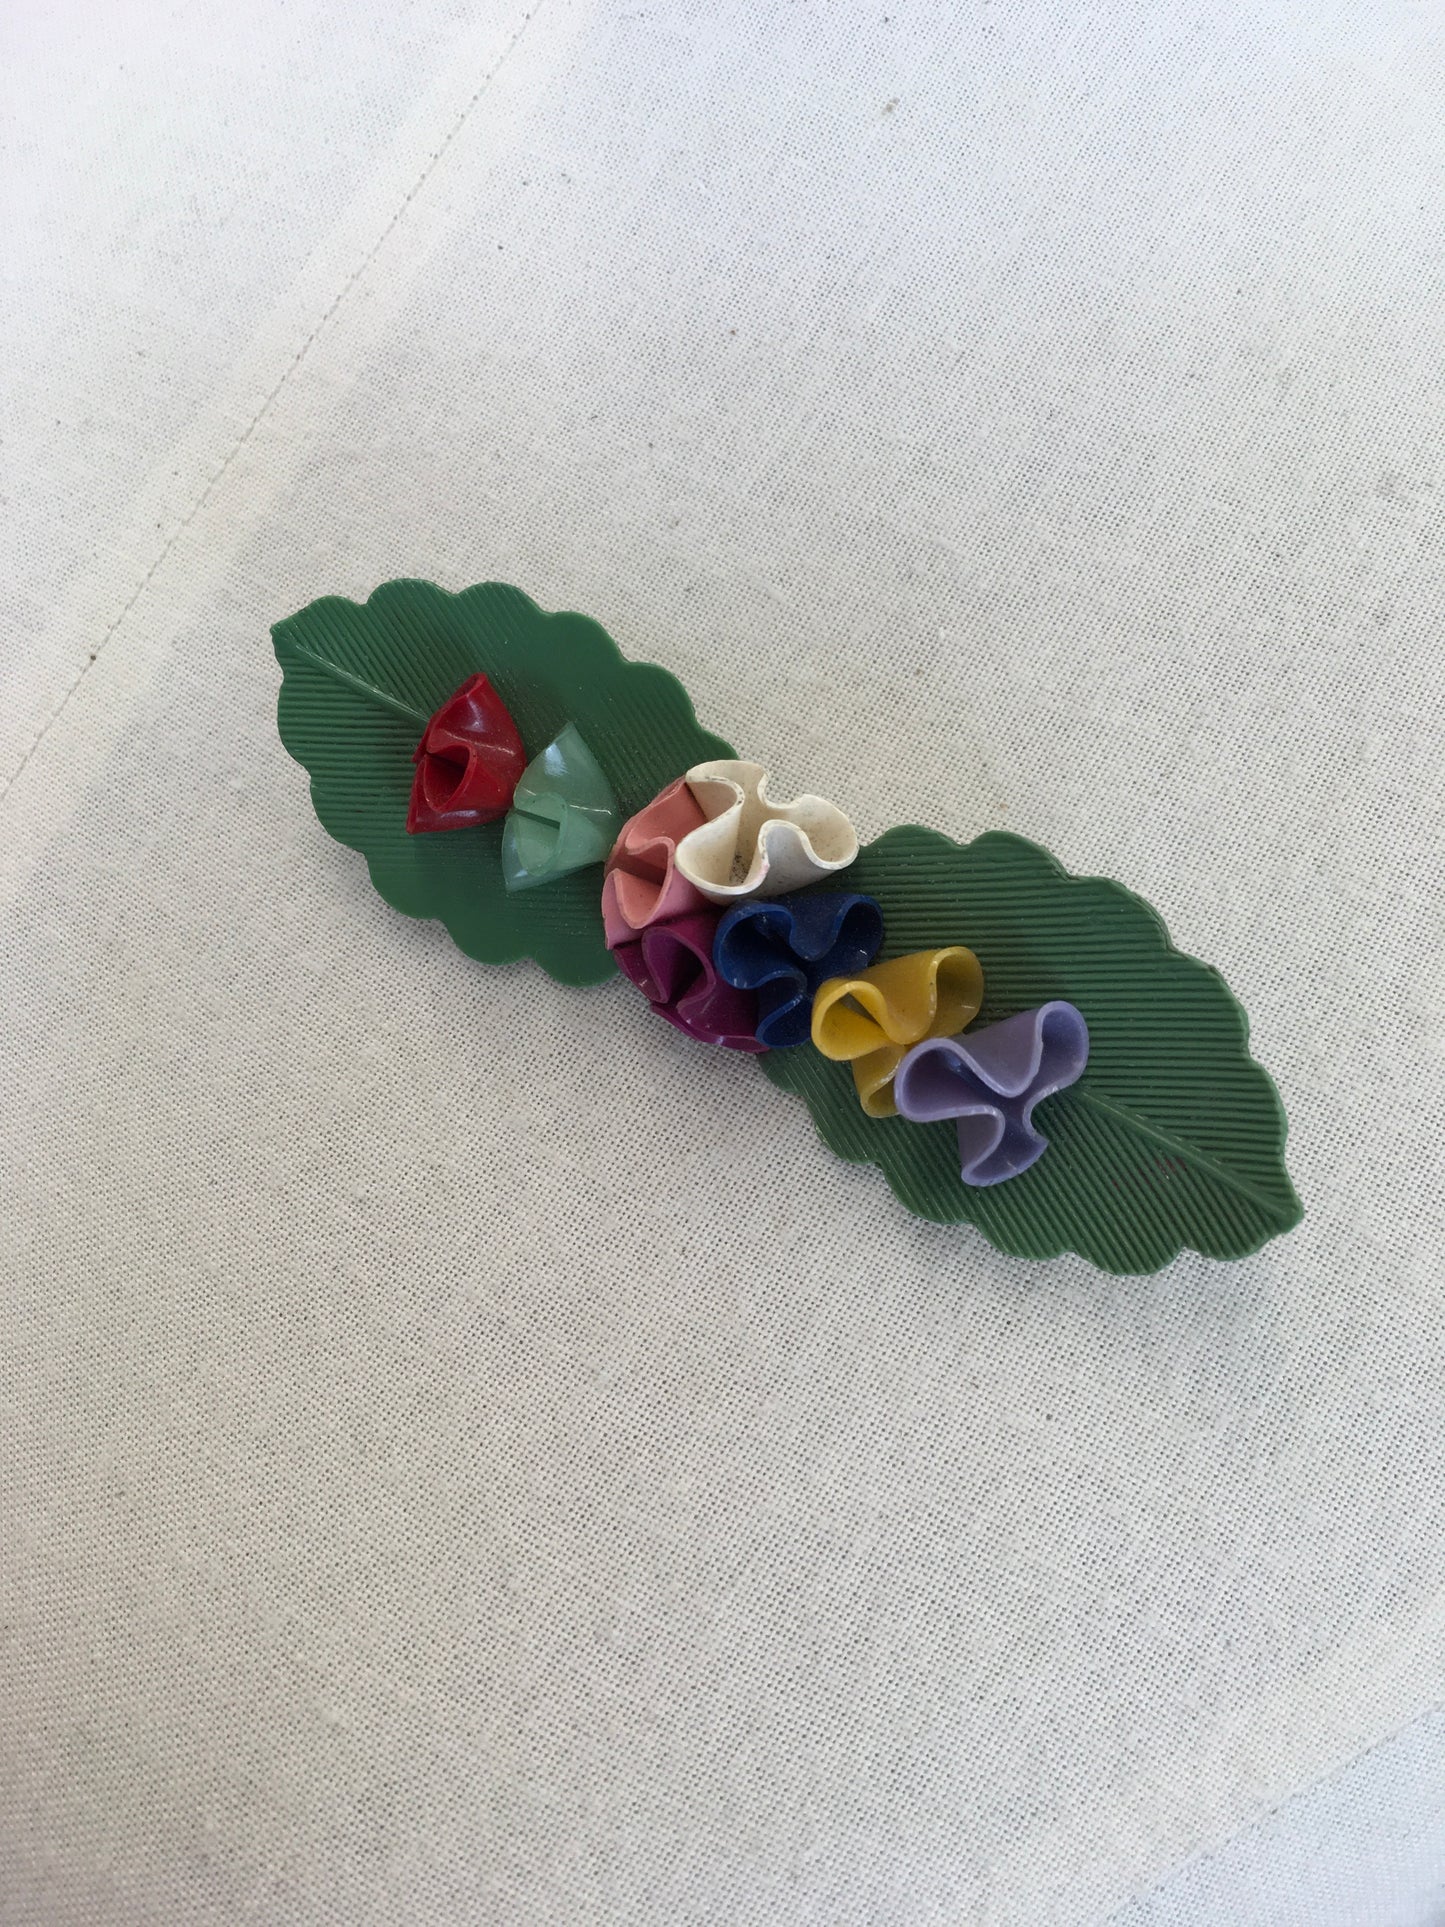 Original 1940’s Make do and Mend Early Plastic Brooch - War Time Pallet of An English Cottage Garden